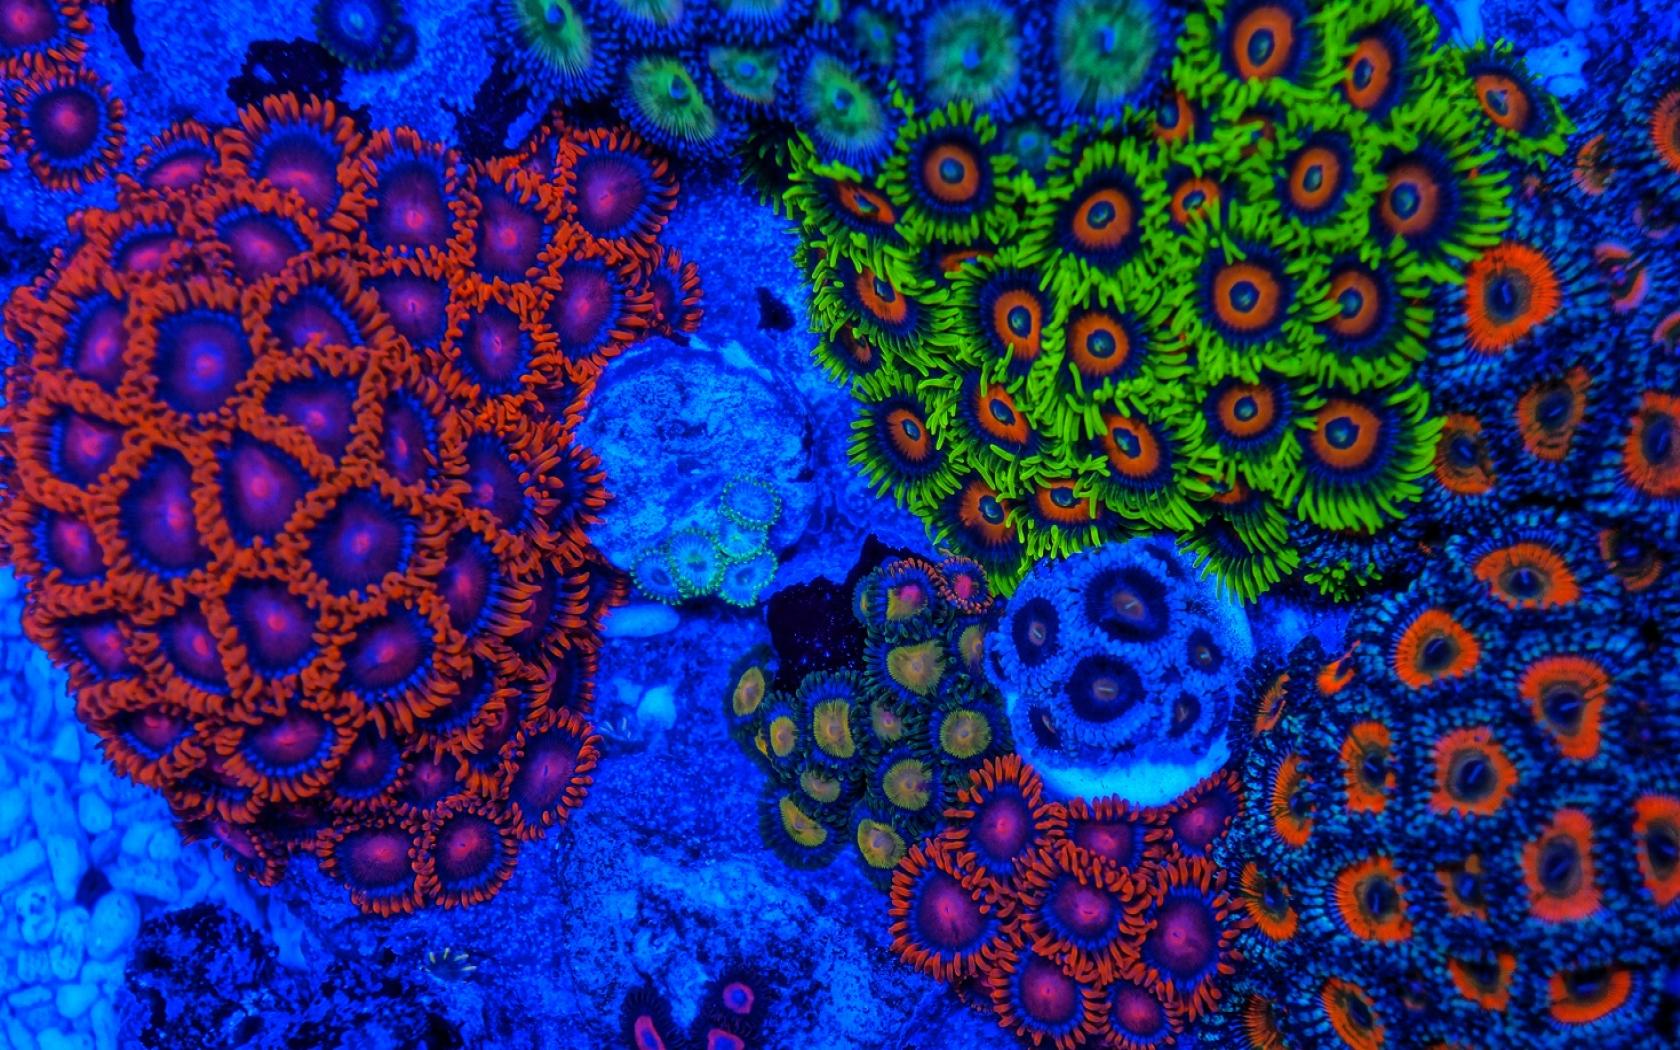 New Lock Screen Wallpapers animal, coral, close up, colorful, colors, coral reef, earth